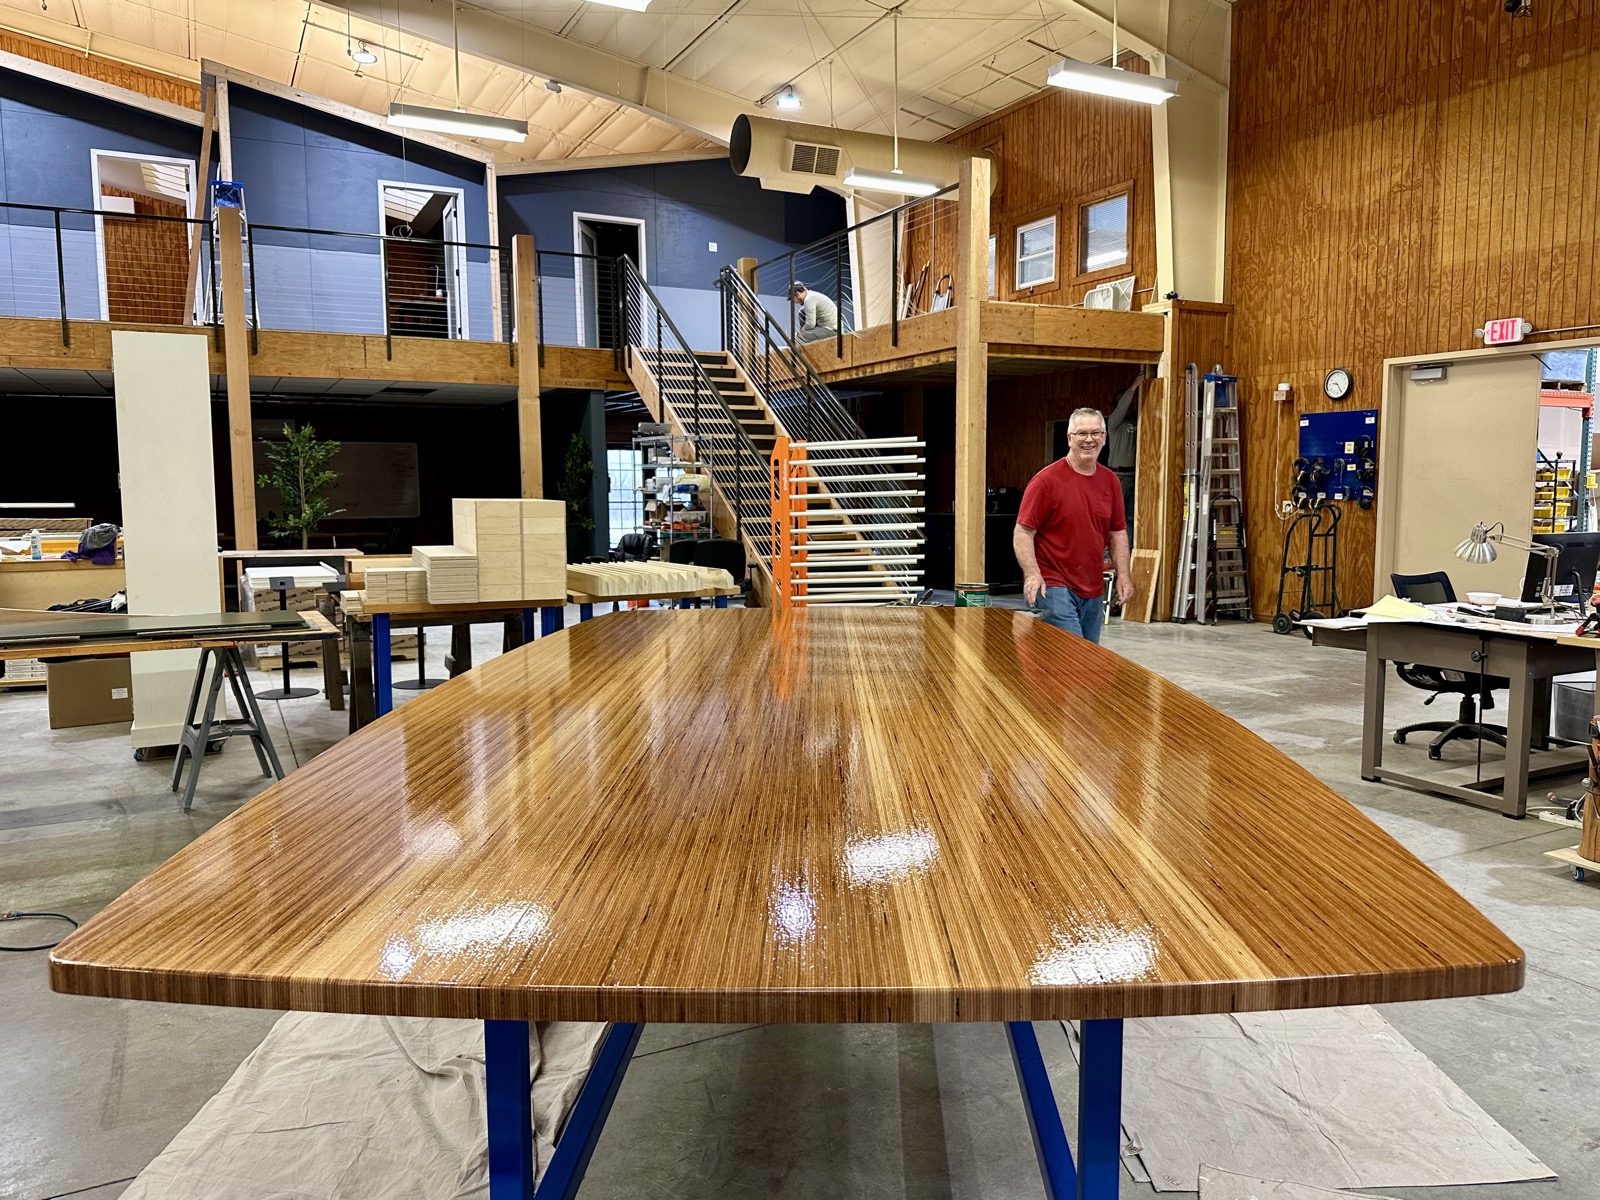 6'x12' boat shaped conference table at Upland